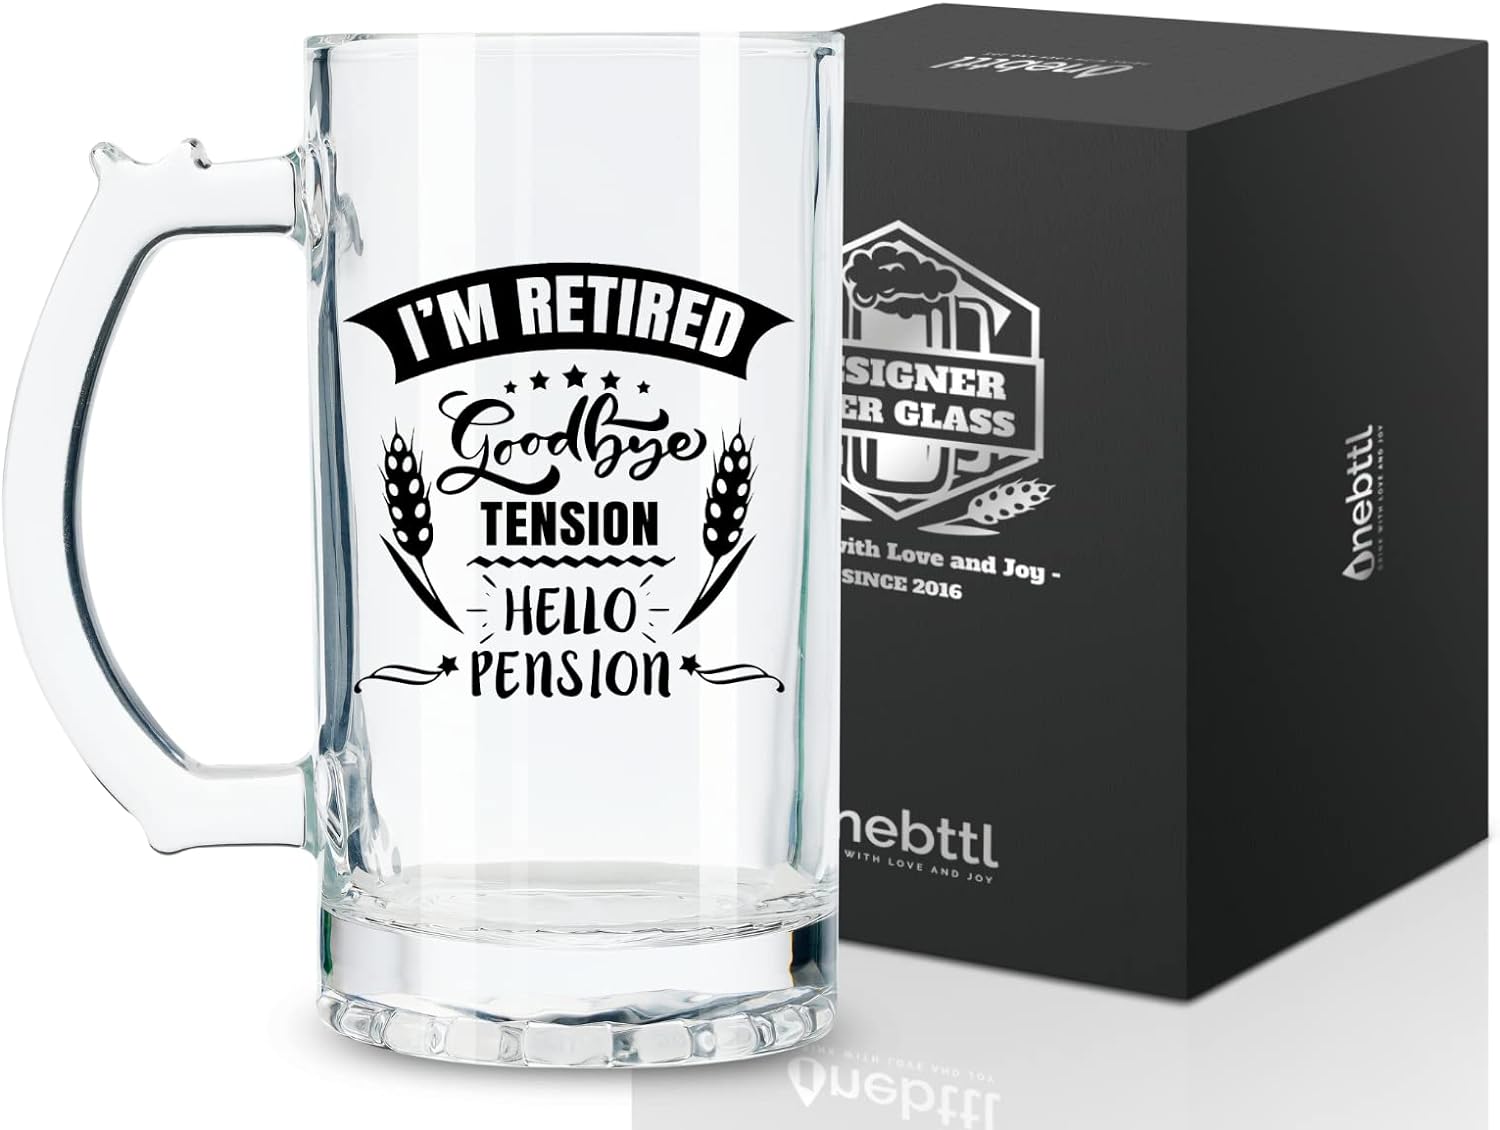 Onebttl Best Unique Retirement Gifts for Men, Retirement Beer Mug Gifts, Goodbye Tension Hello Pension Beer Glass 500ml(17oz), for Dad, Grandpa, Police, Teacher, Boss, Brother, Gifts for Retired Men